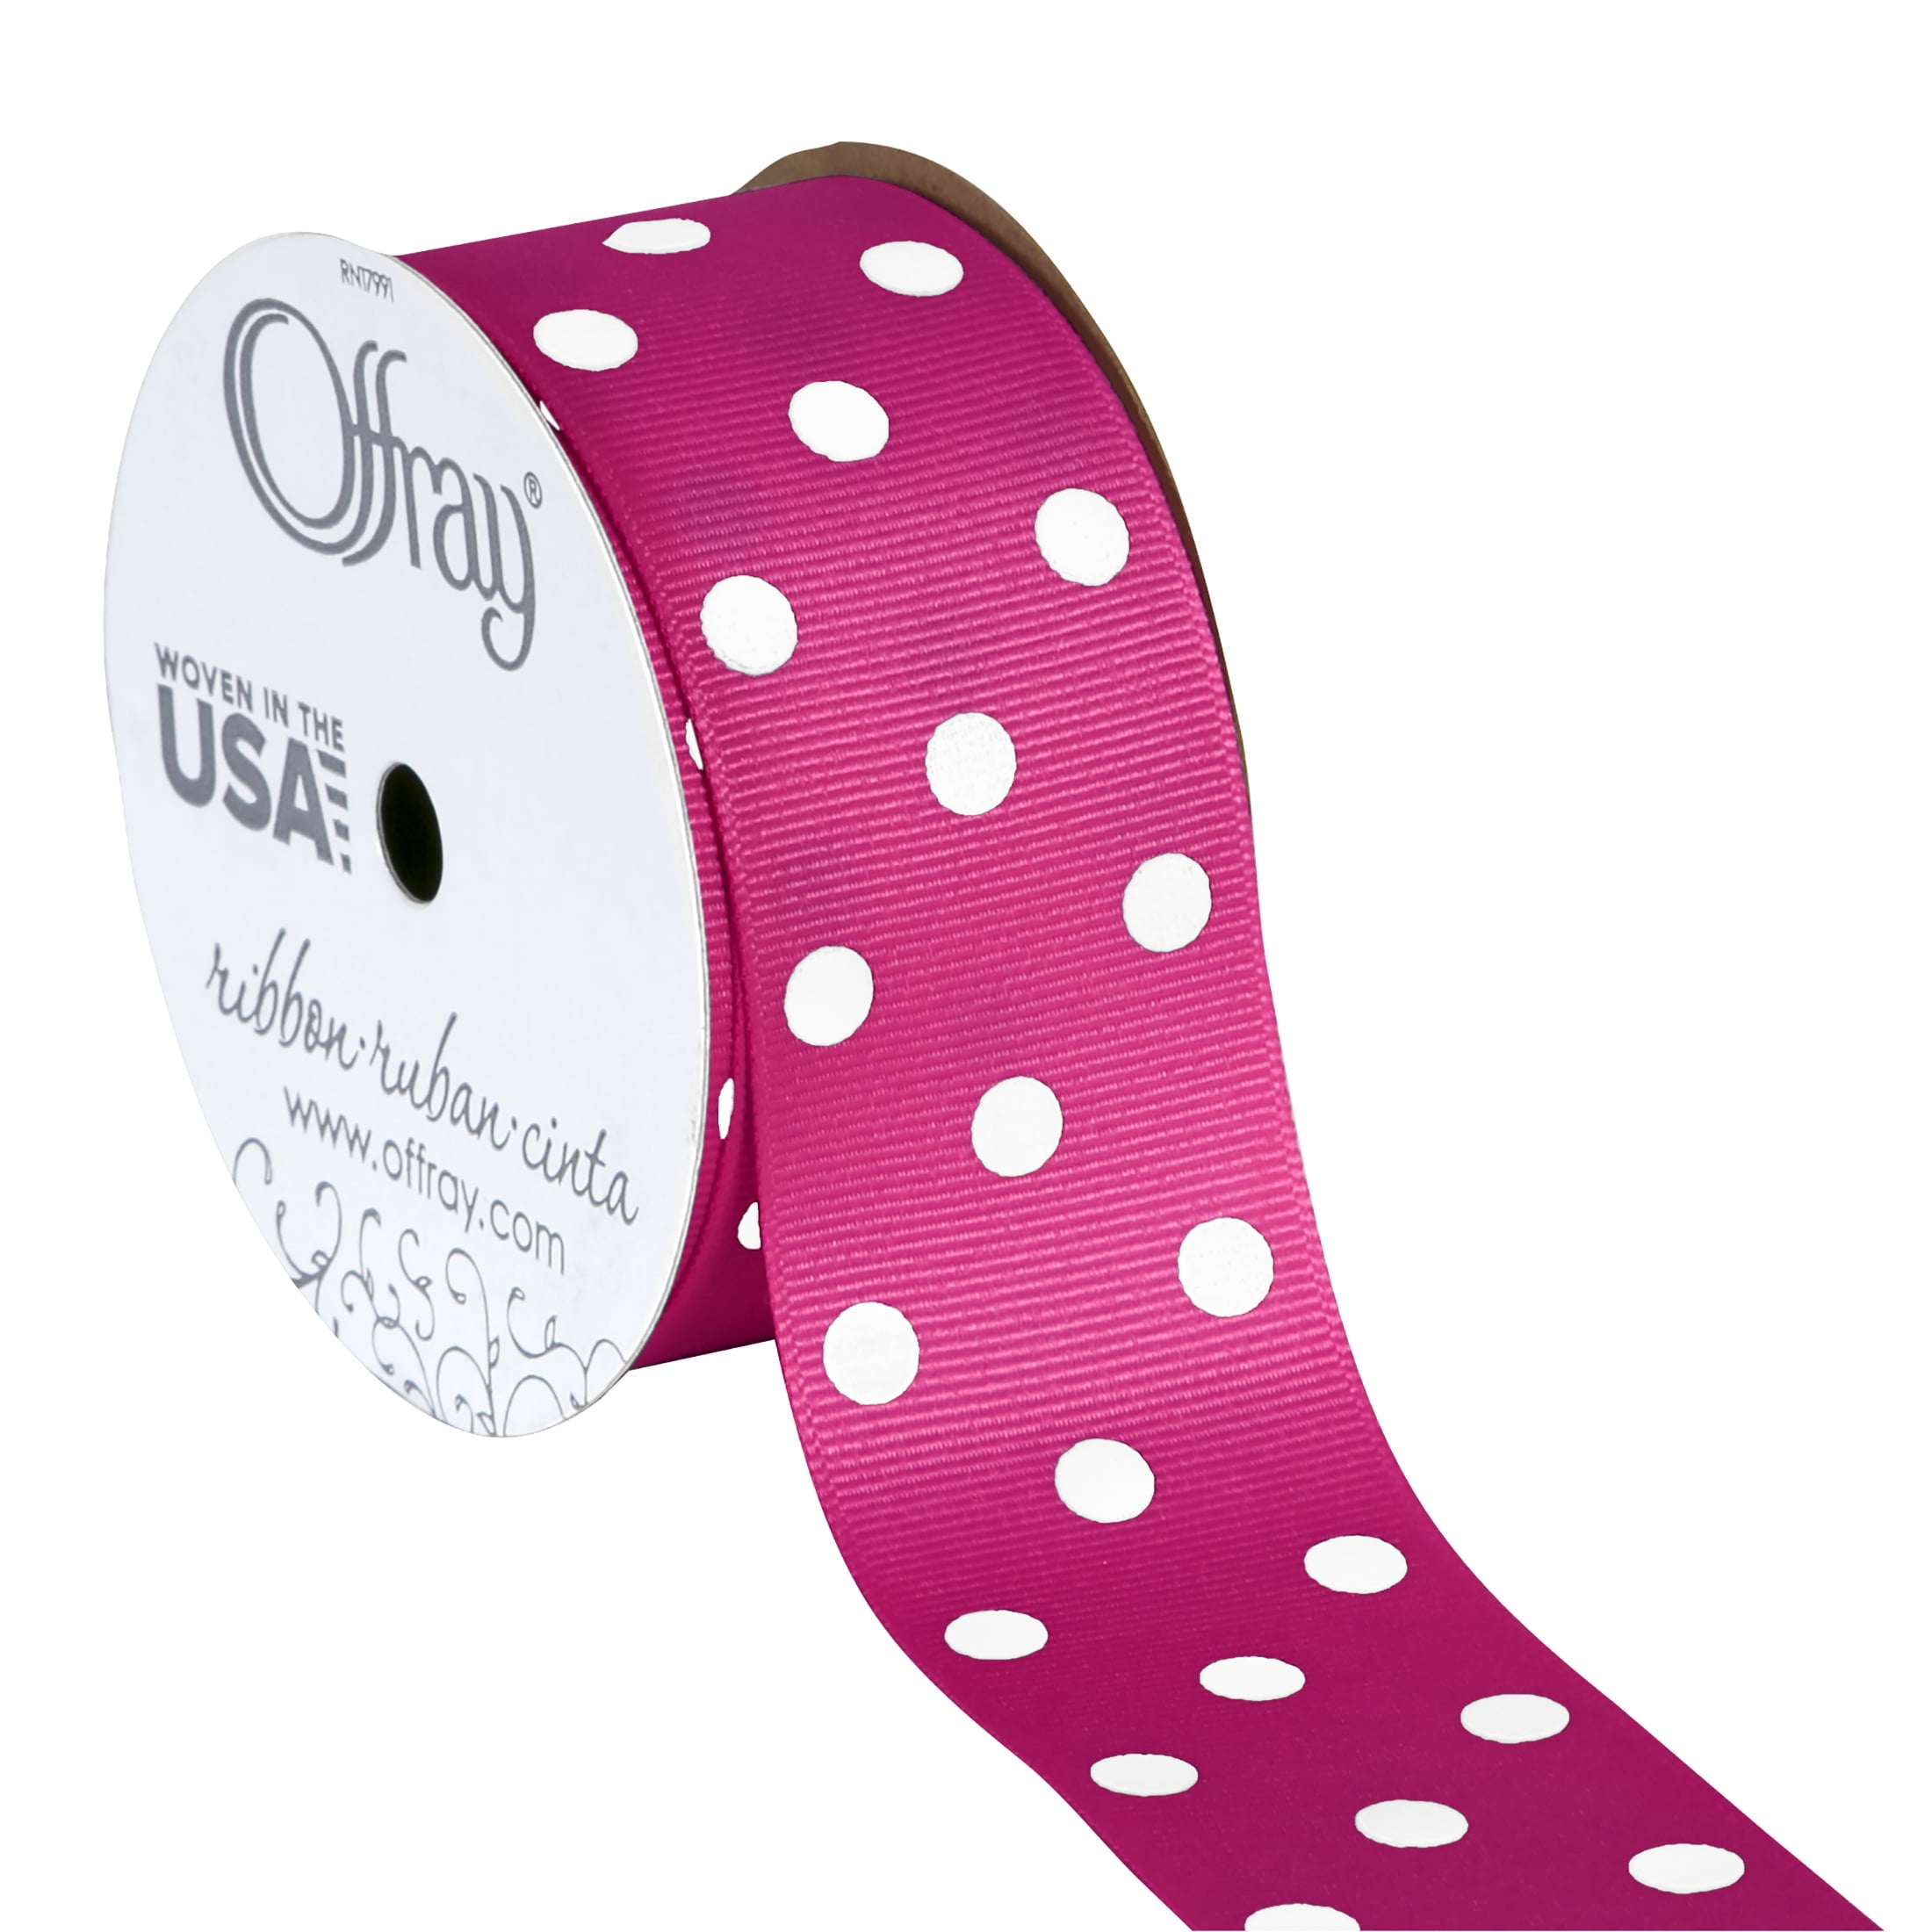 Next day shipping from USA Multi Purpose Ribbon Bows Navy Pink Polka Dot Assorted Sizes